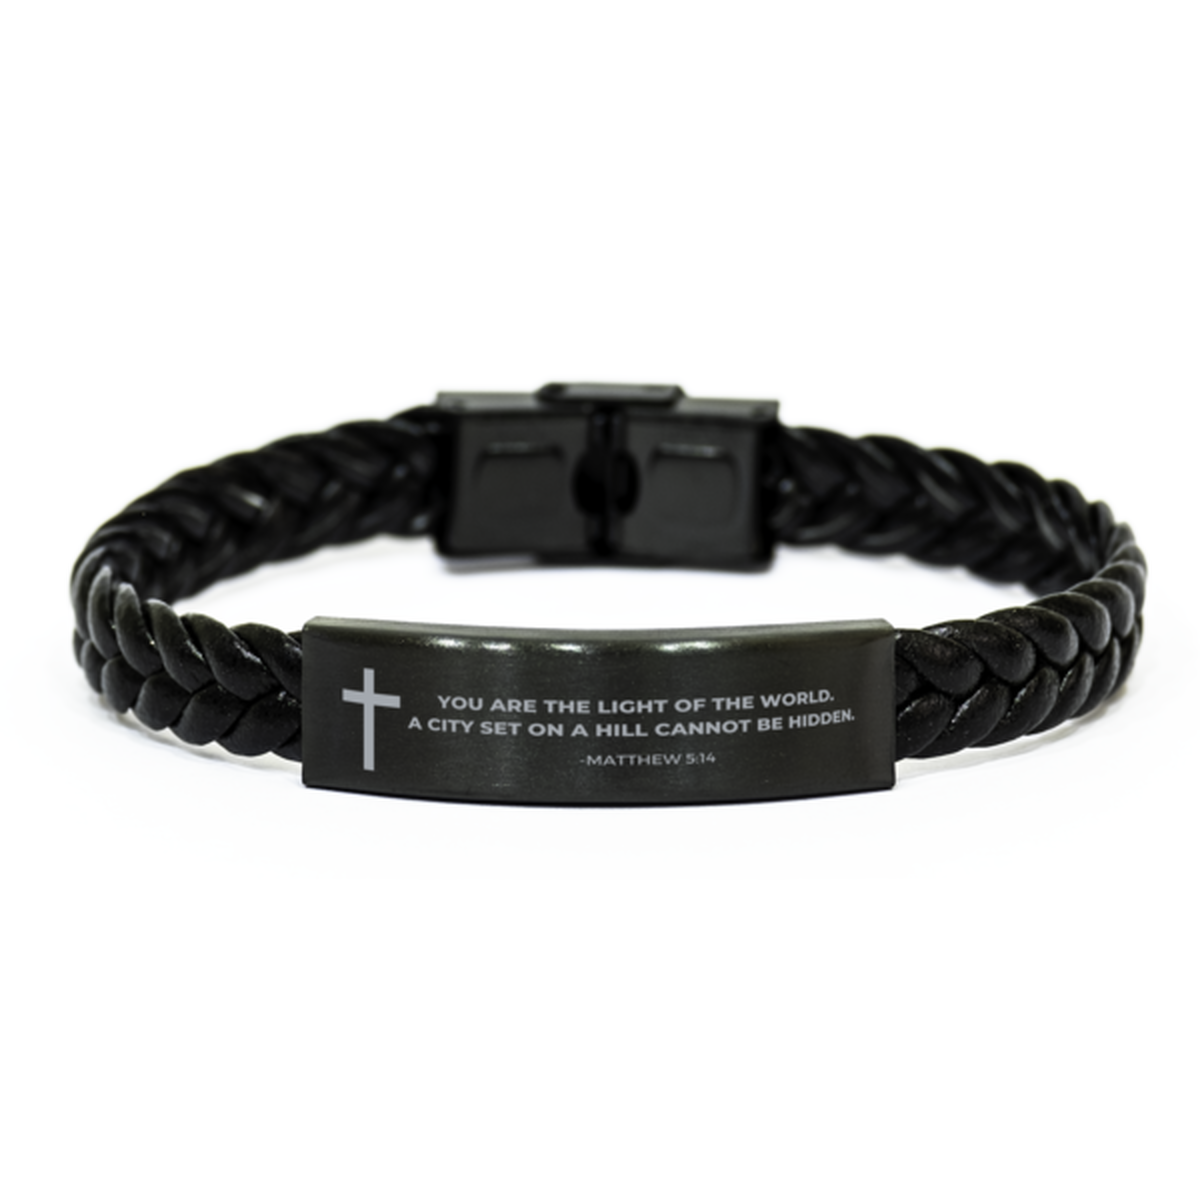 Baptism Gifts For Teenage Boys Girls, Christian Bible Verse Braided Leather Bracelet, You are the light of the world, Catholic Confirmation Gifts for Son, Godson, Grandson, Nephew